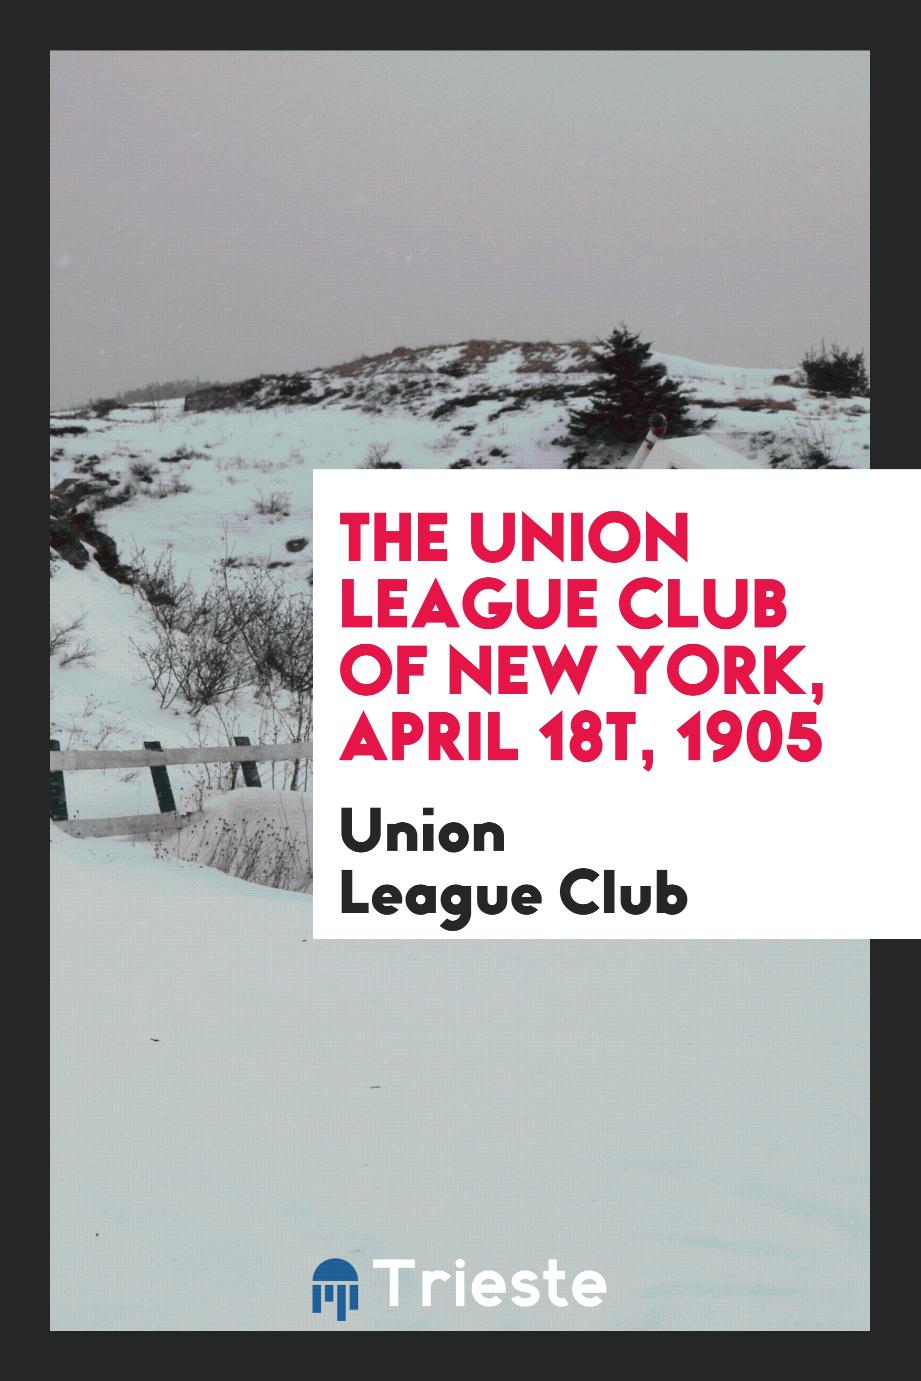 The Union League Club of New York, April 18t, 1905